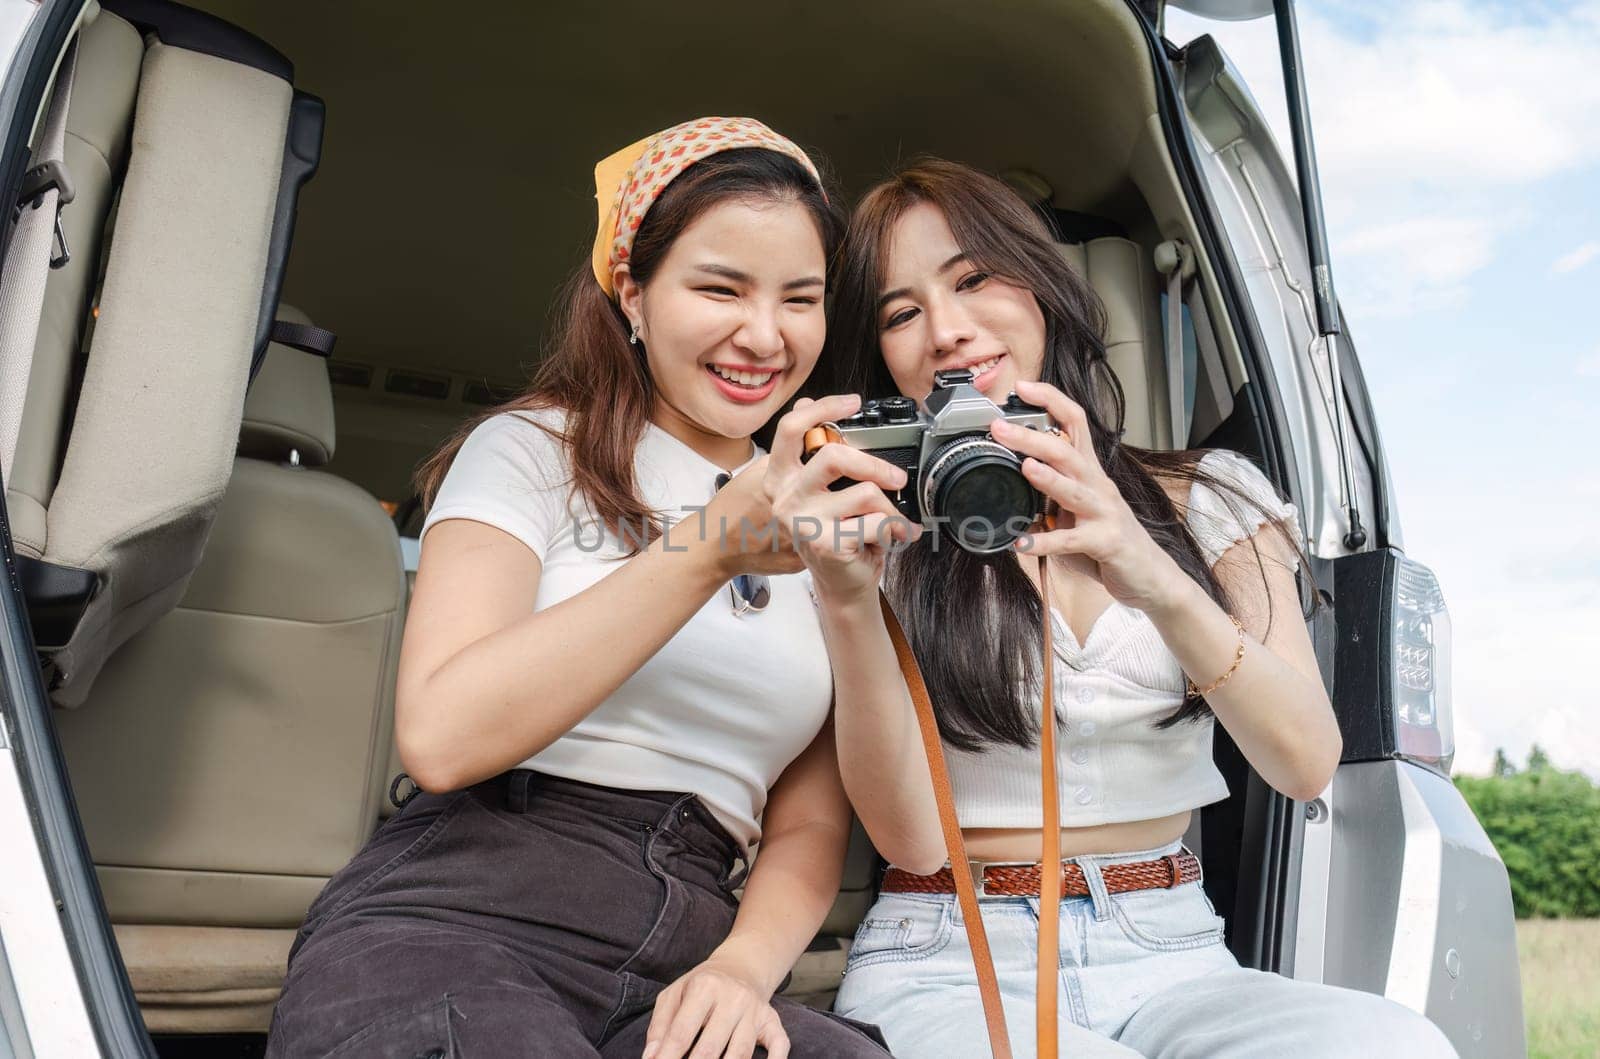 Cute Asian female friends enjoying taking photo with a camera together during a trip. and enjoy sitting and chatting in the back of the car on holiday.